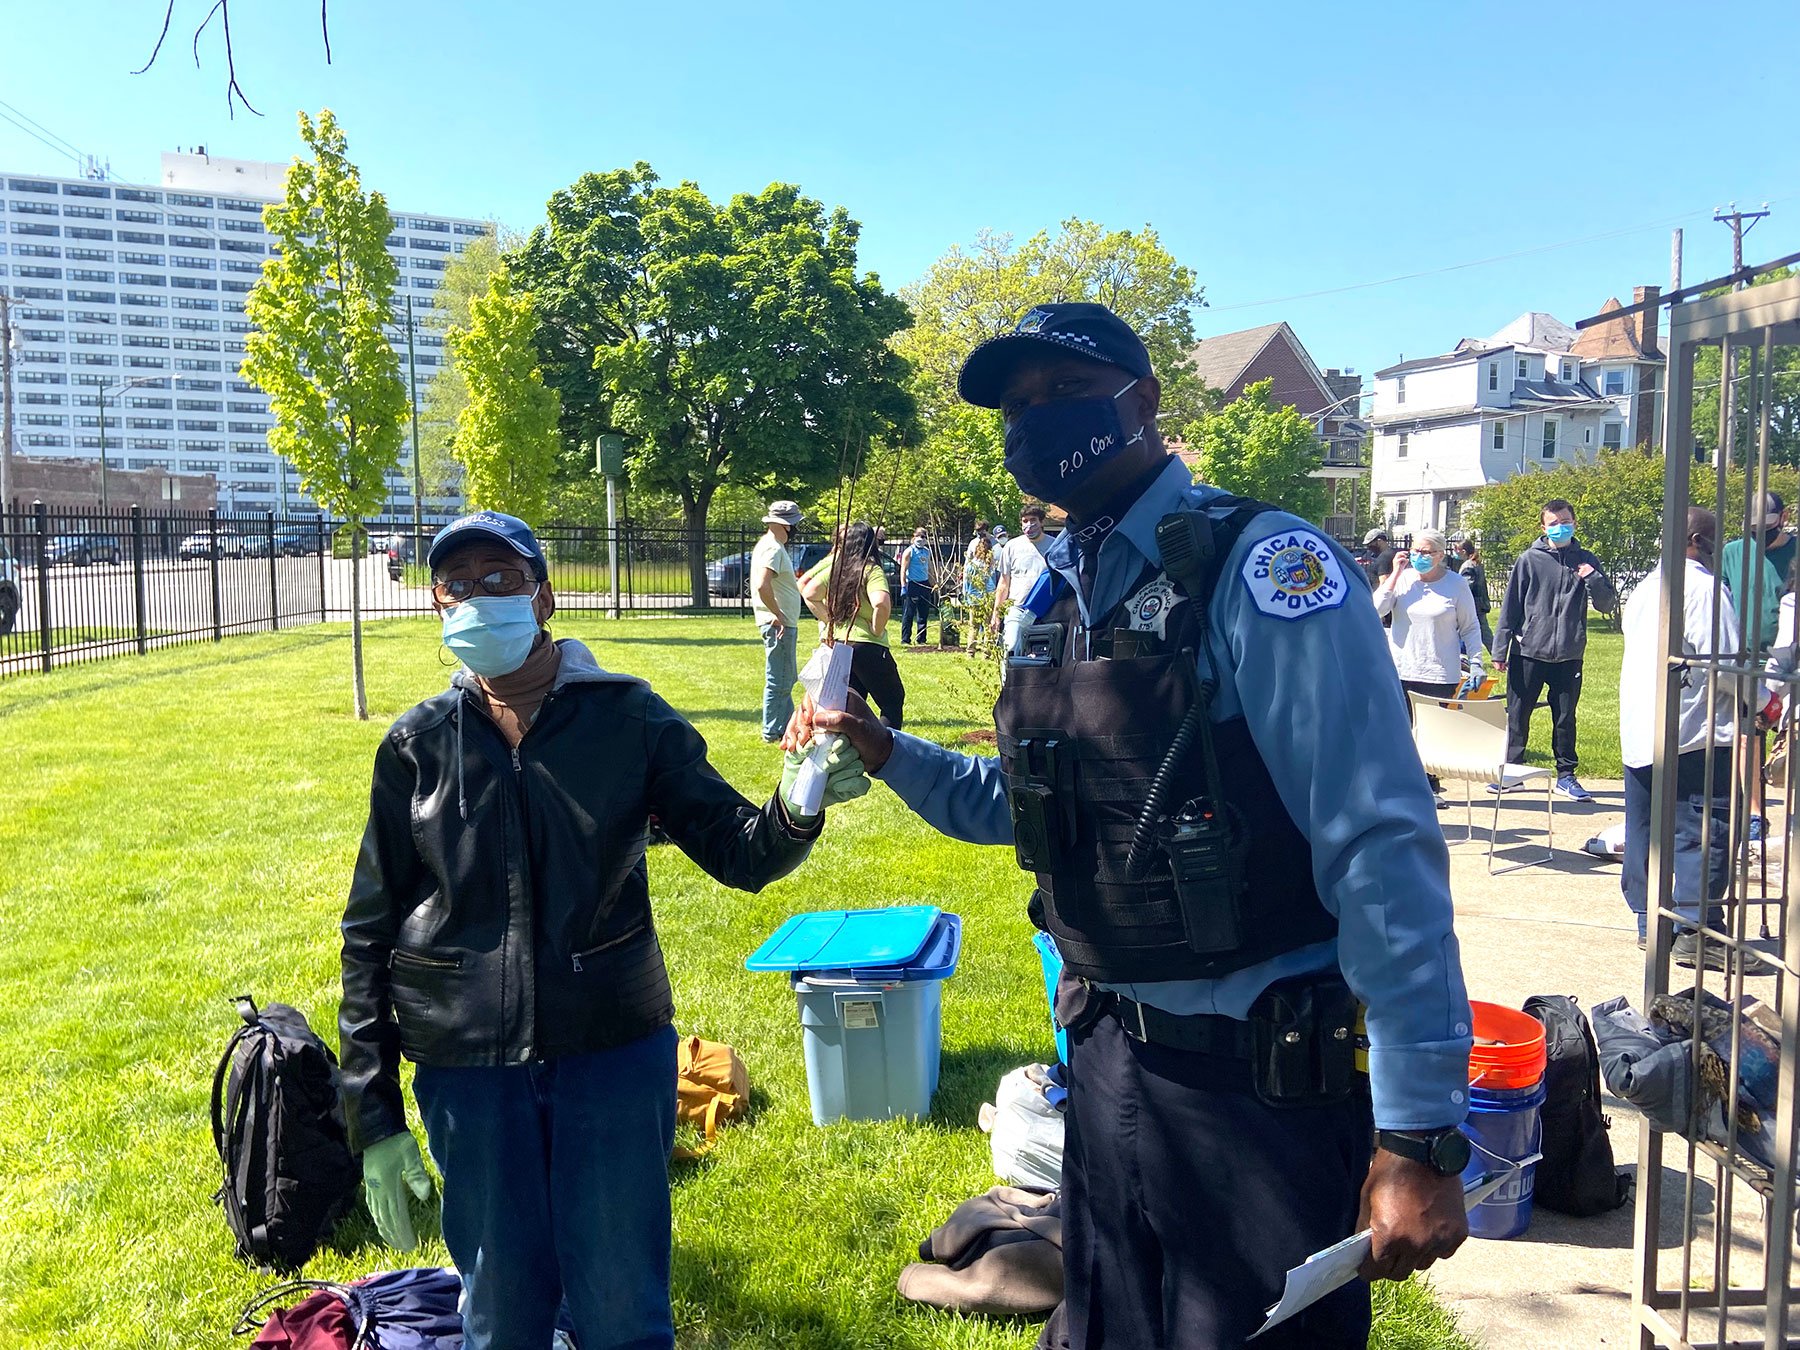  Corporate volunteers from Euromonitor and Coeur Mining participated in the initial planting day at Lafayette Terrace, and local police officers also stopped by to learn more about community sustainability. 